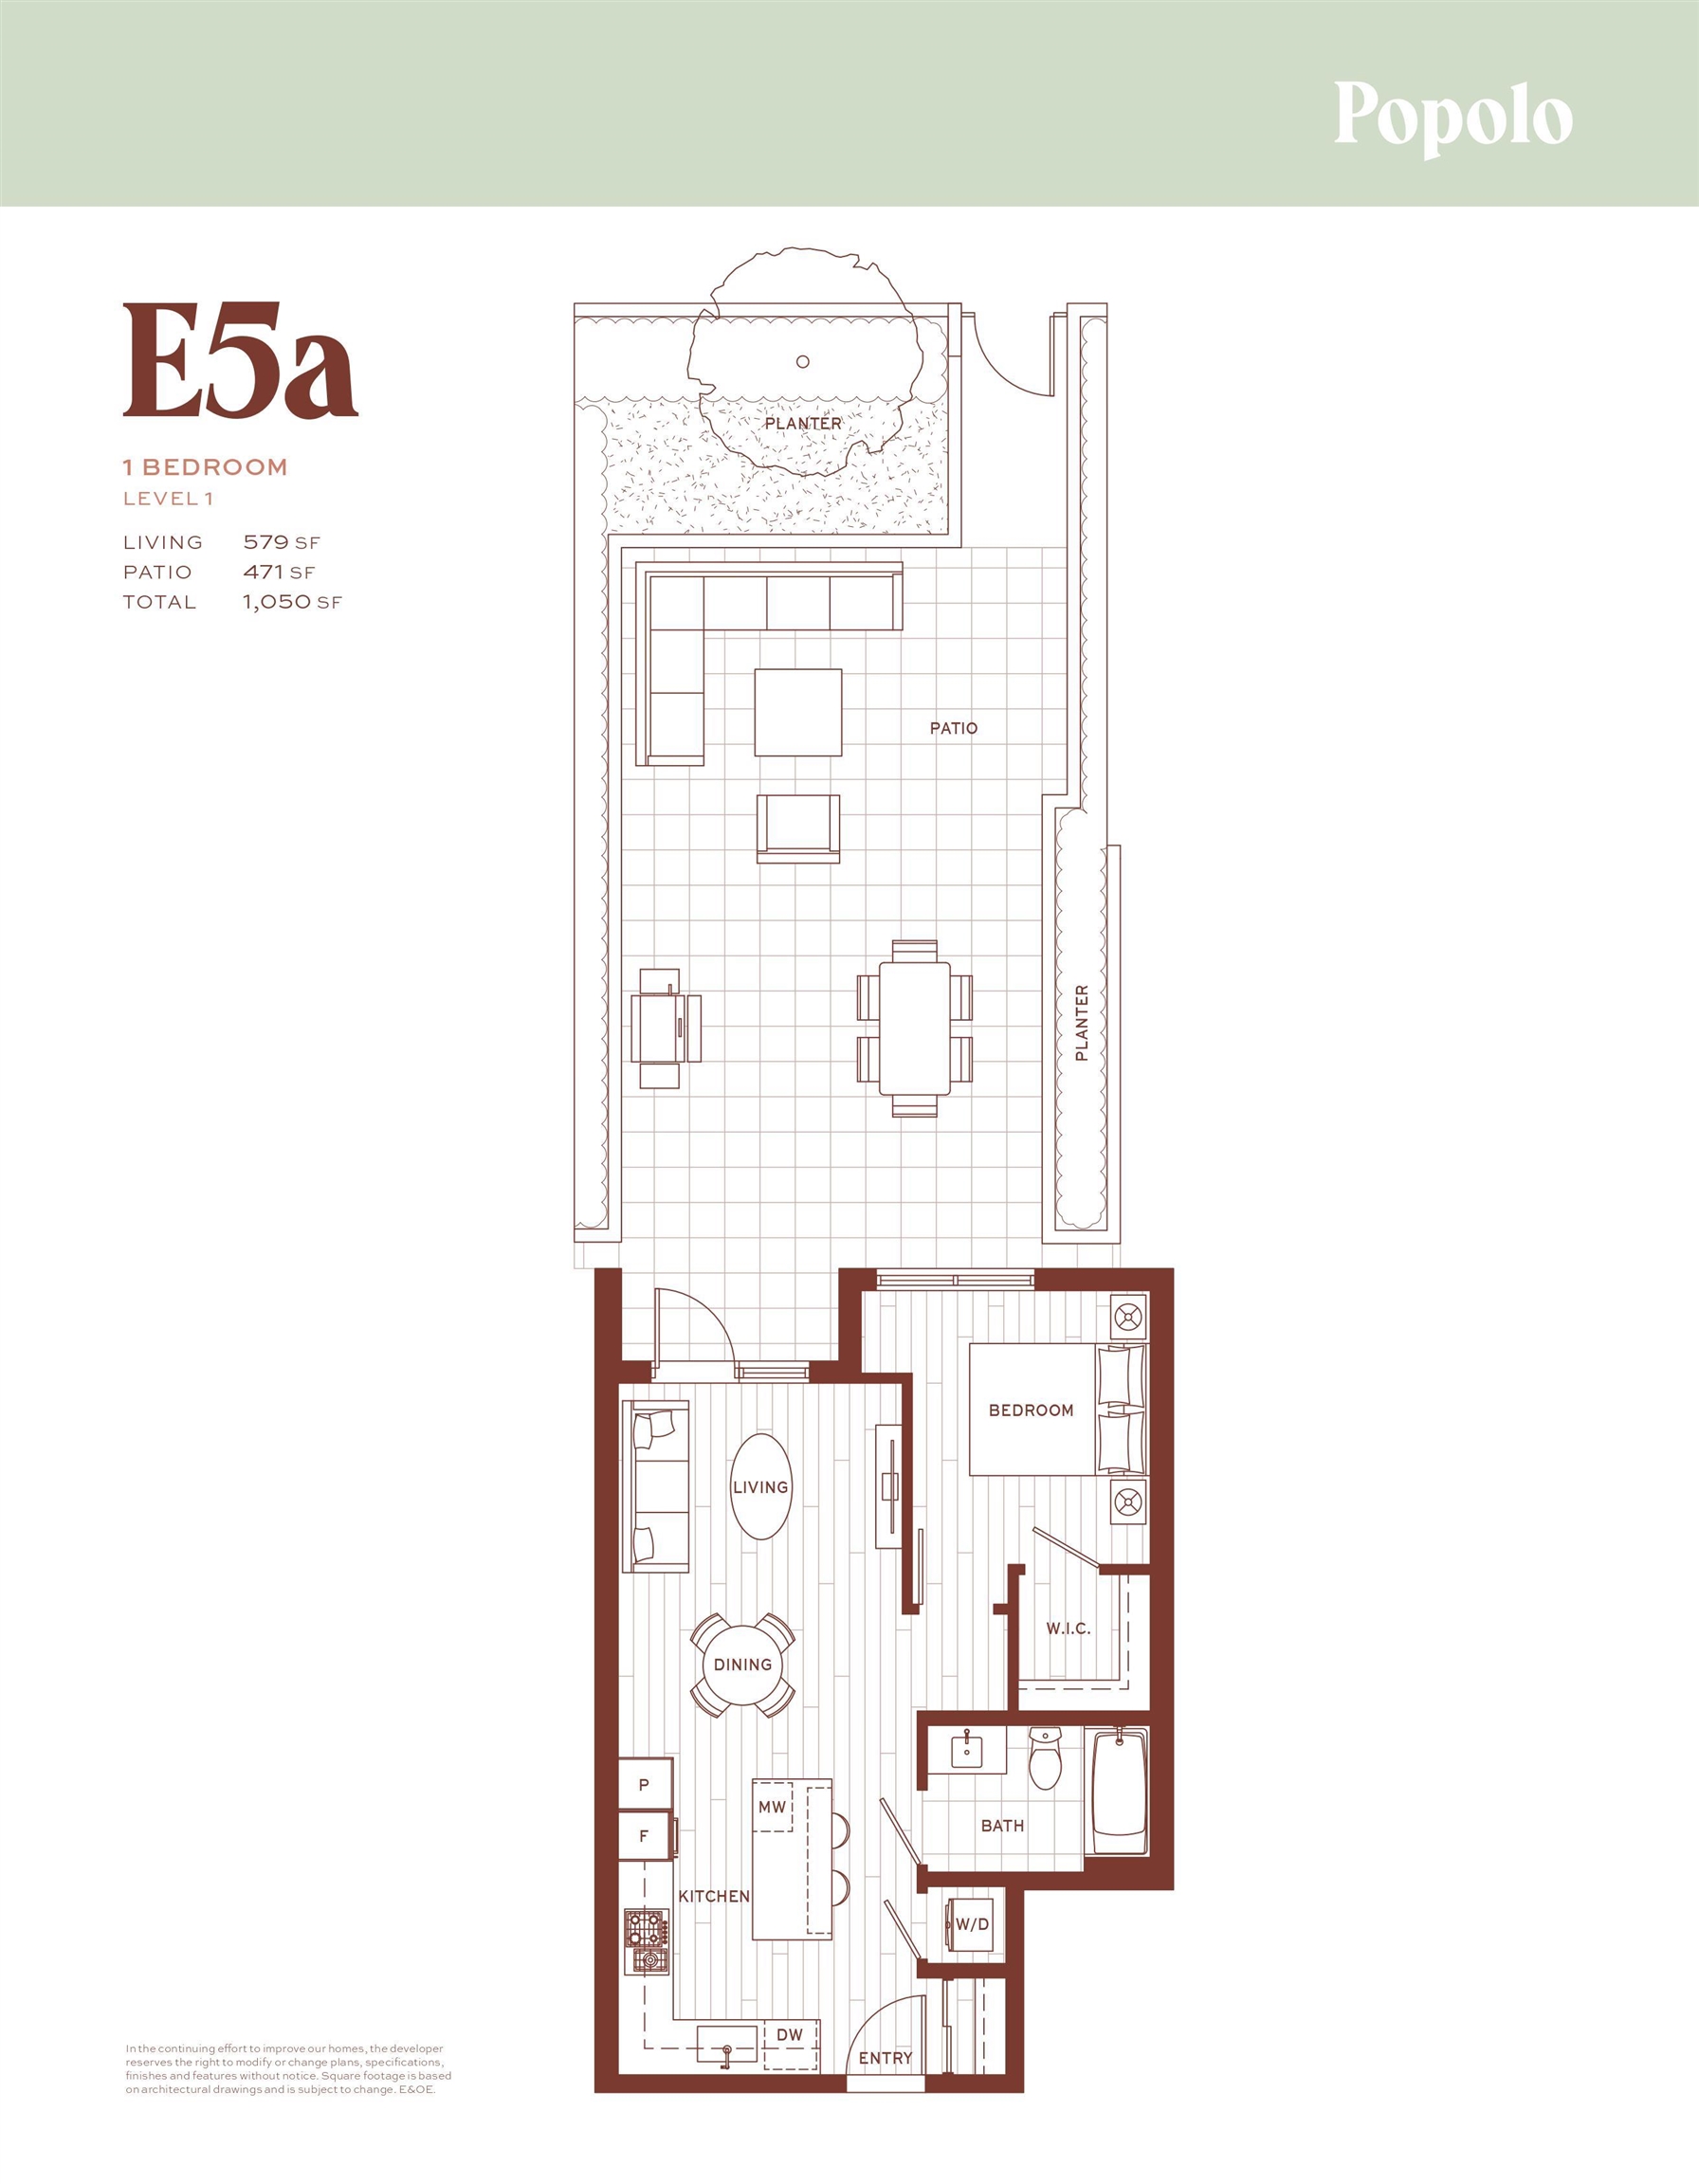 112 Floor Plan of Popolo Condos with undefined beds